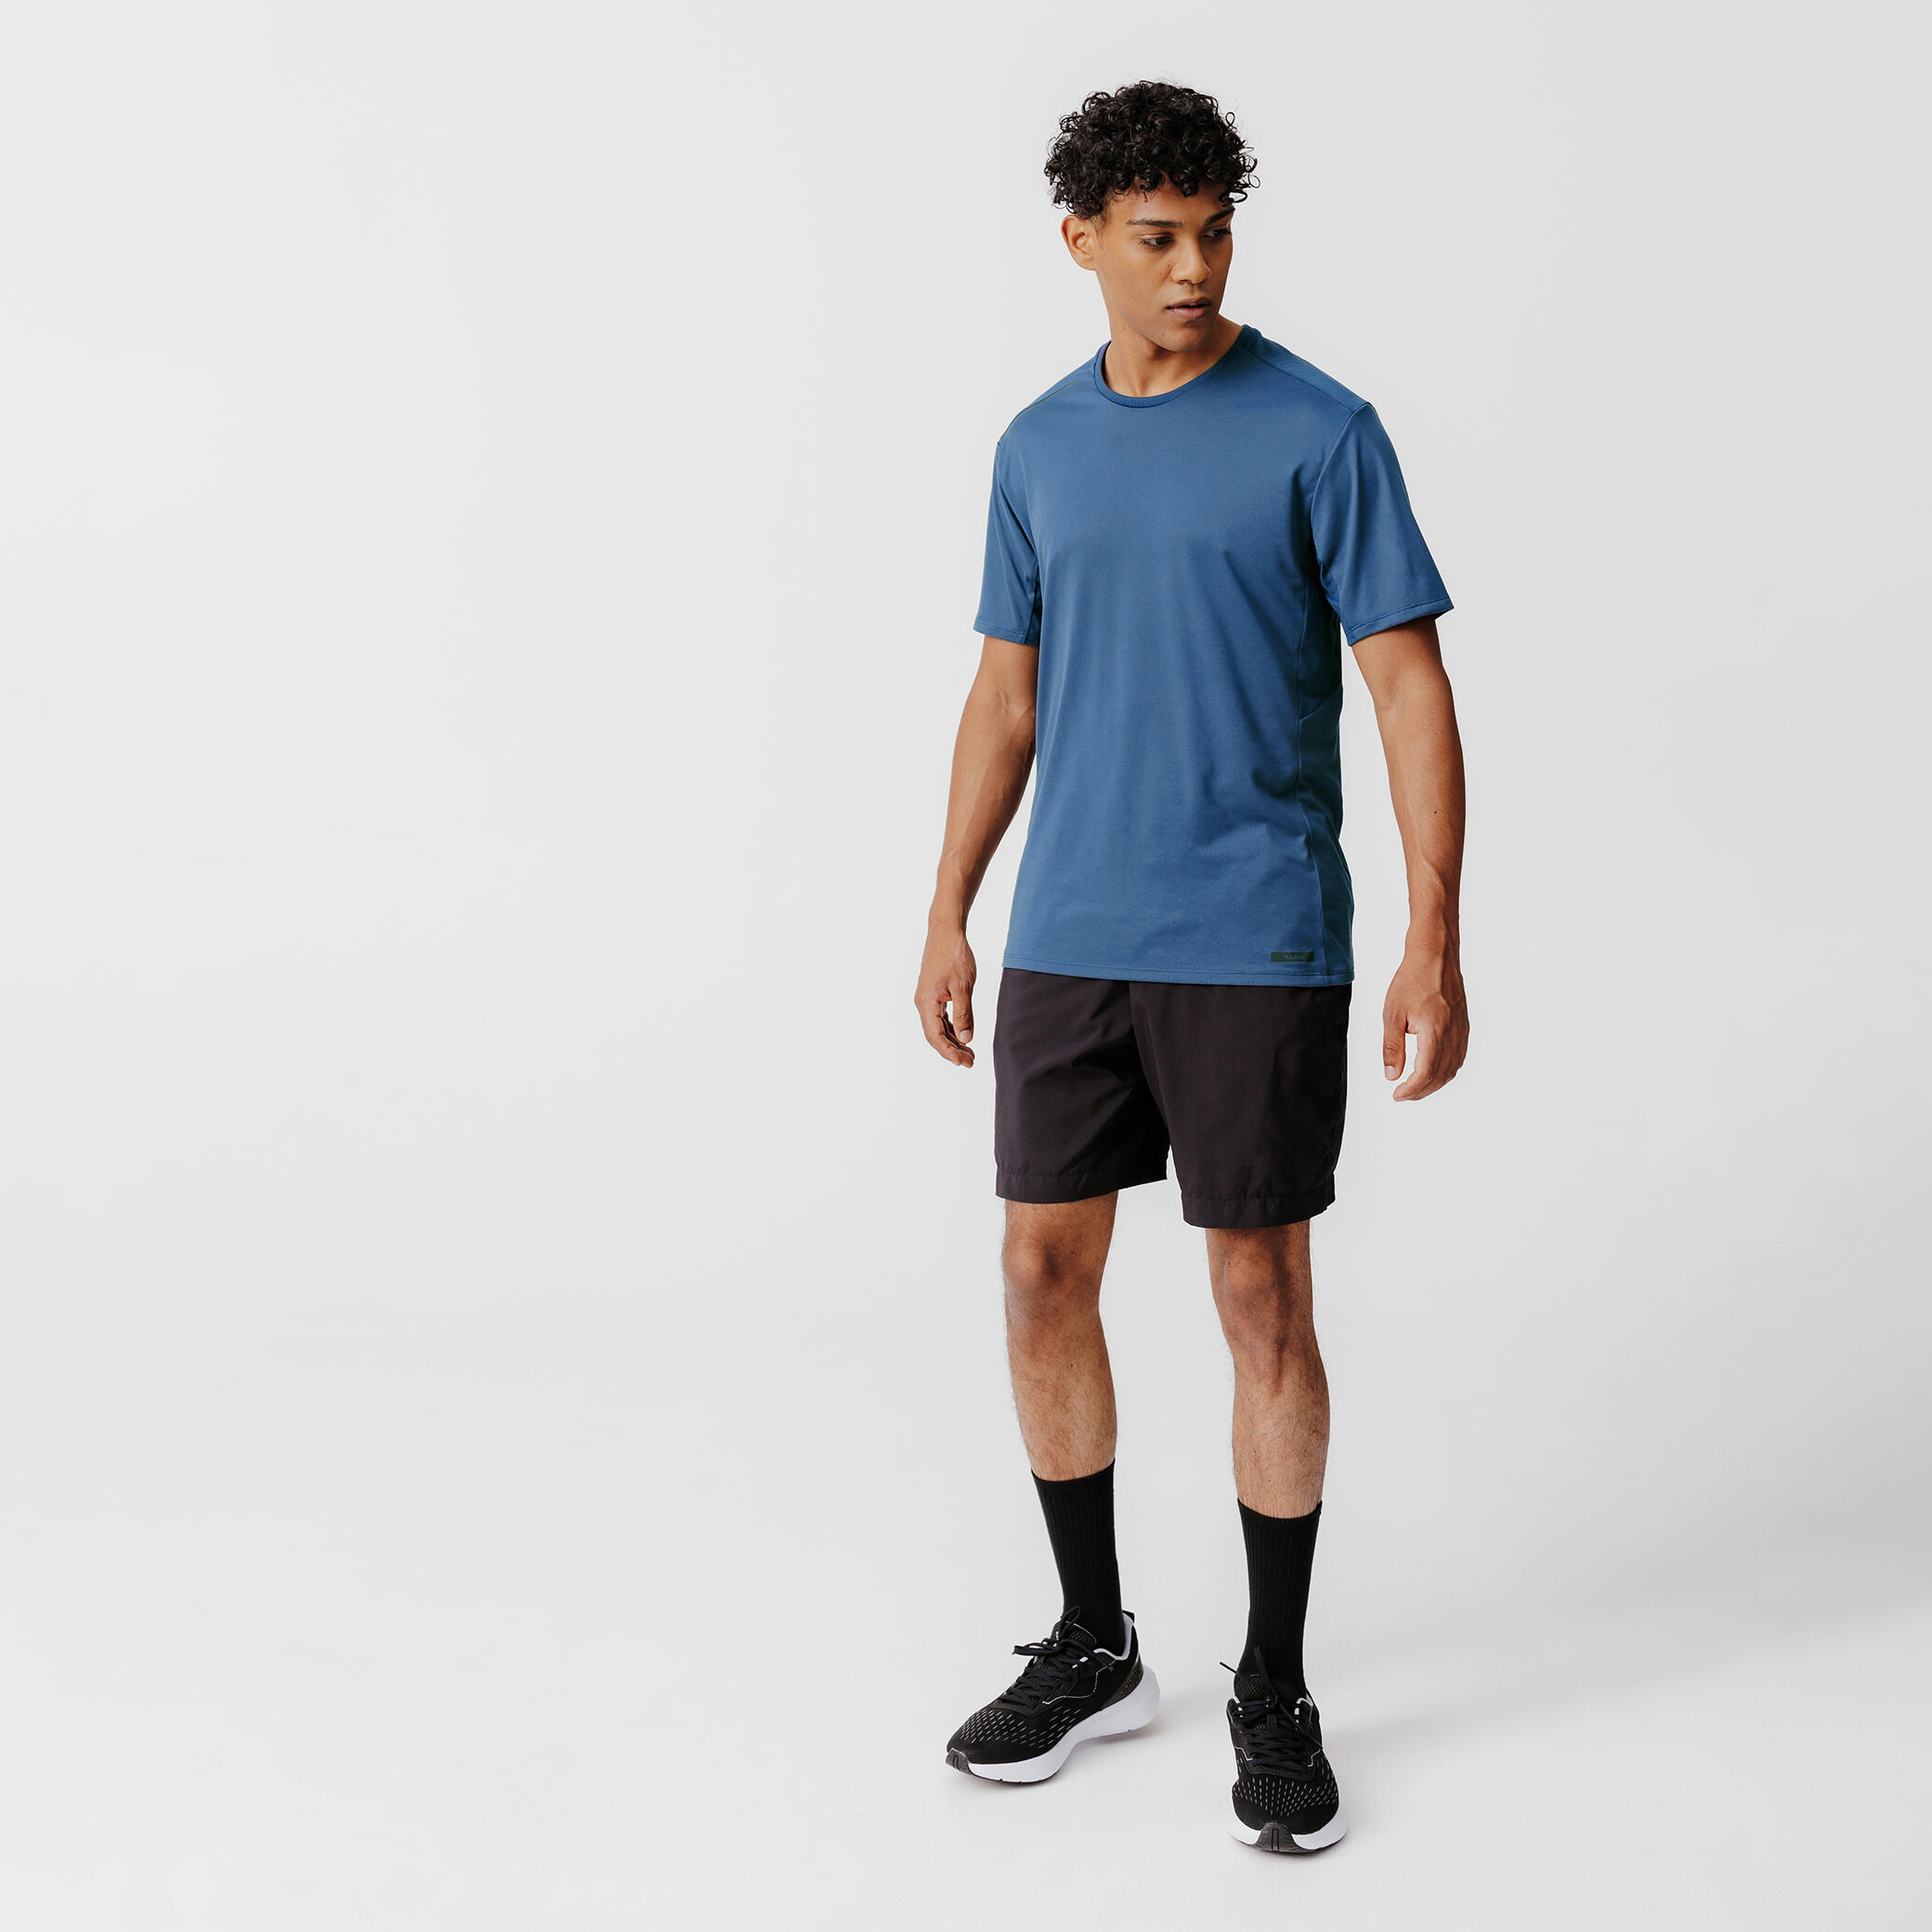 Men's two-in-one running shorts